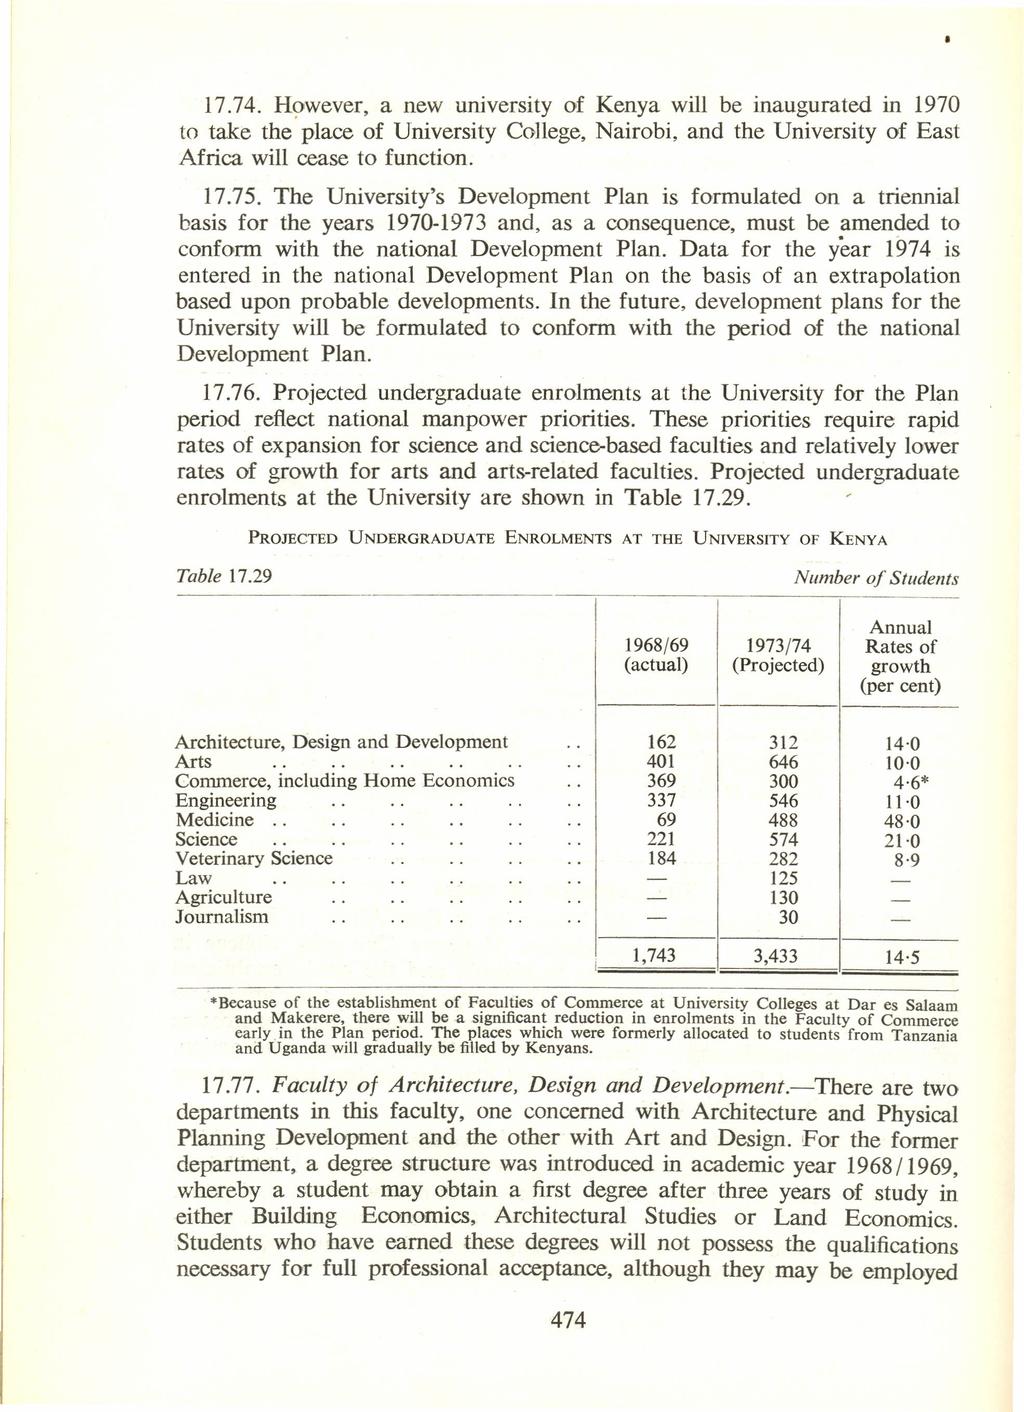 17.74. However, a new university of Kenya will be inaugurated in 1970 to take the' place of University College, Nairobi, and the University of East Africa will cease to function. 17.75.